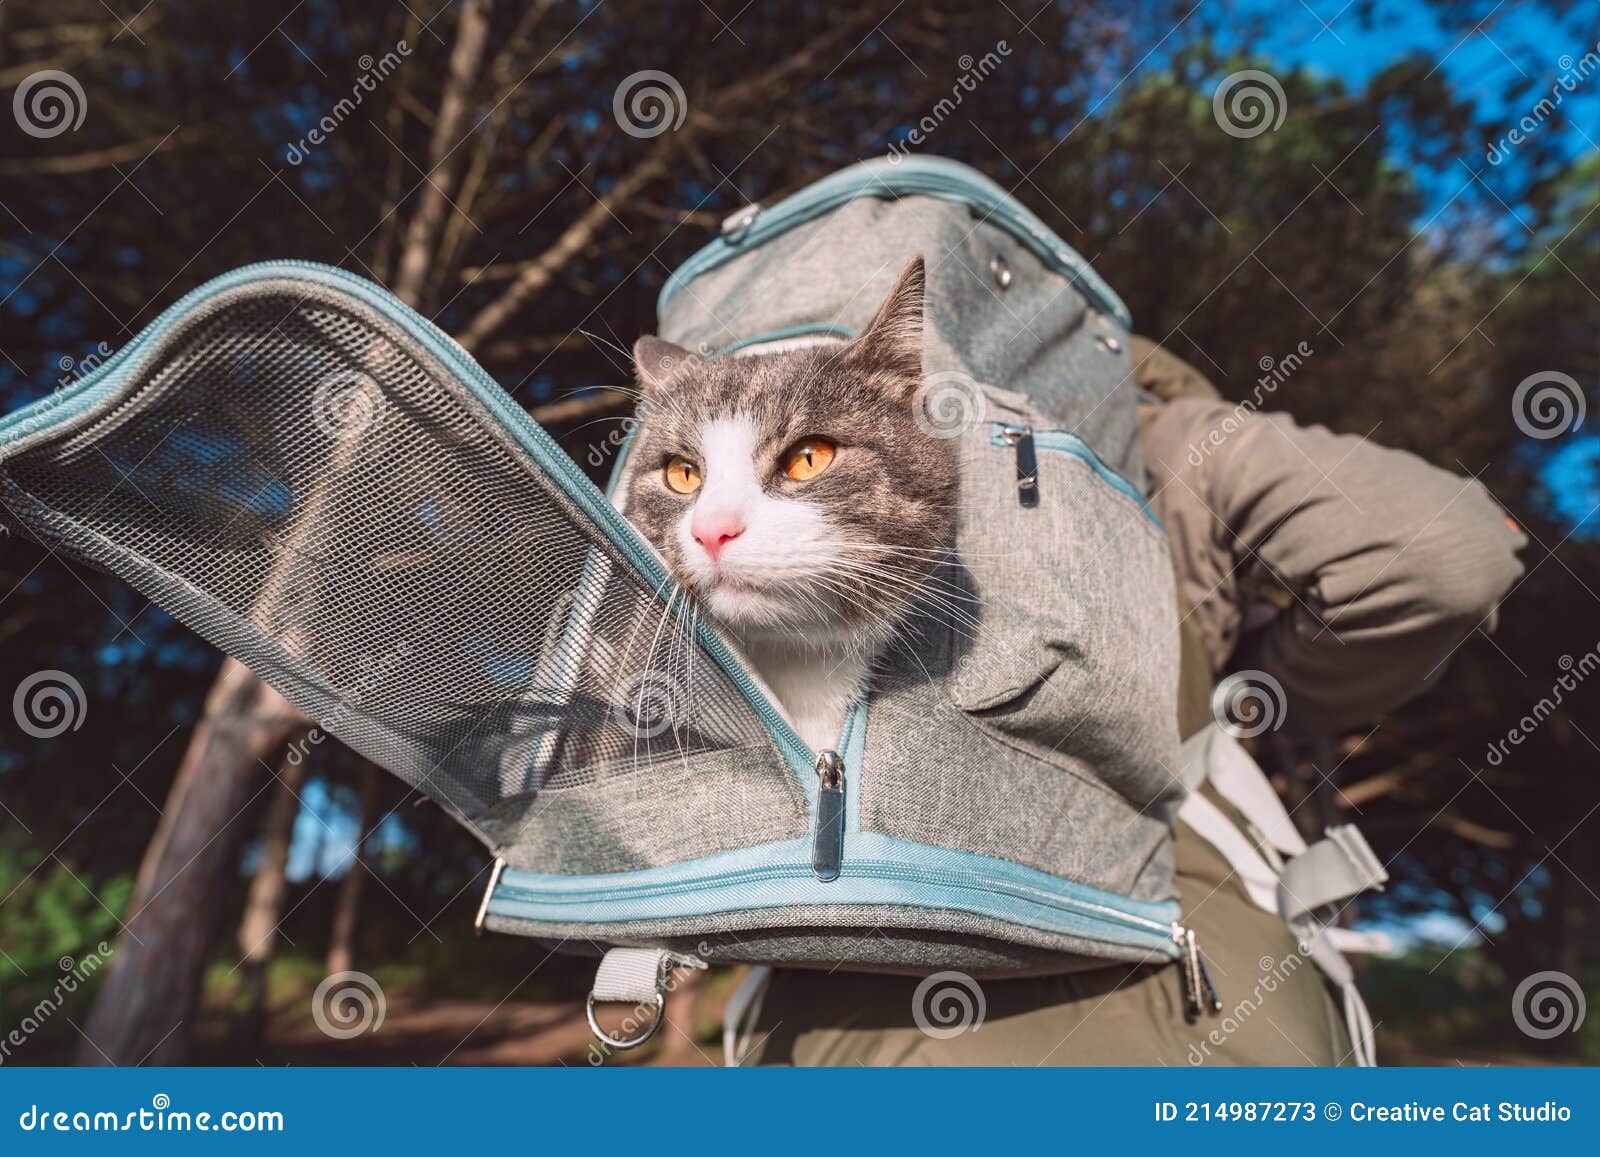 Funny Tabby Cat Looking Out from Backpack Carrier. Backpack for Carrying  Animals Stock Image - Image of feline, back: 214987273